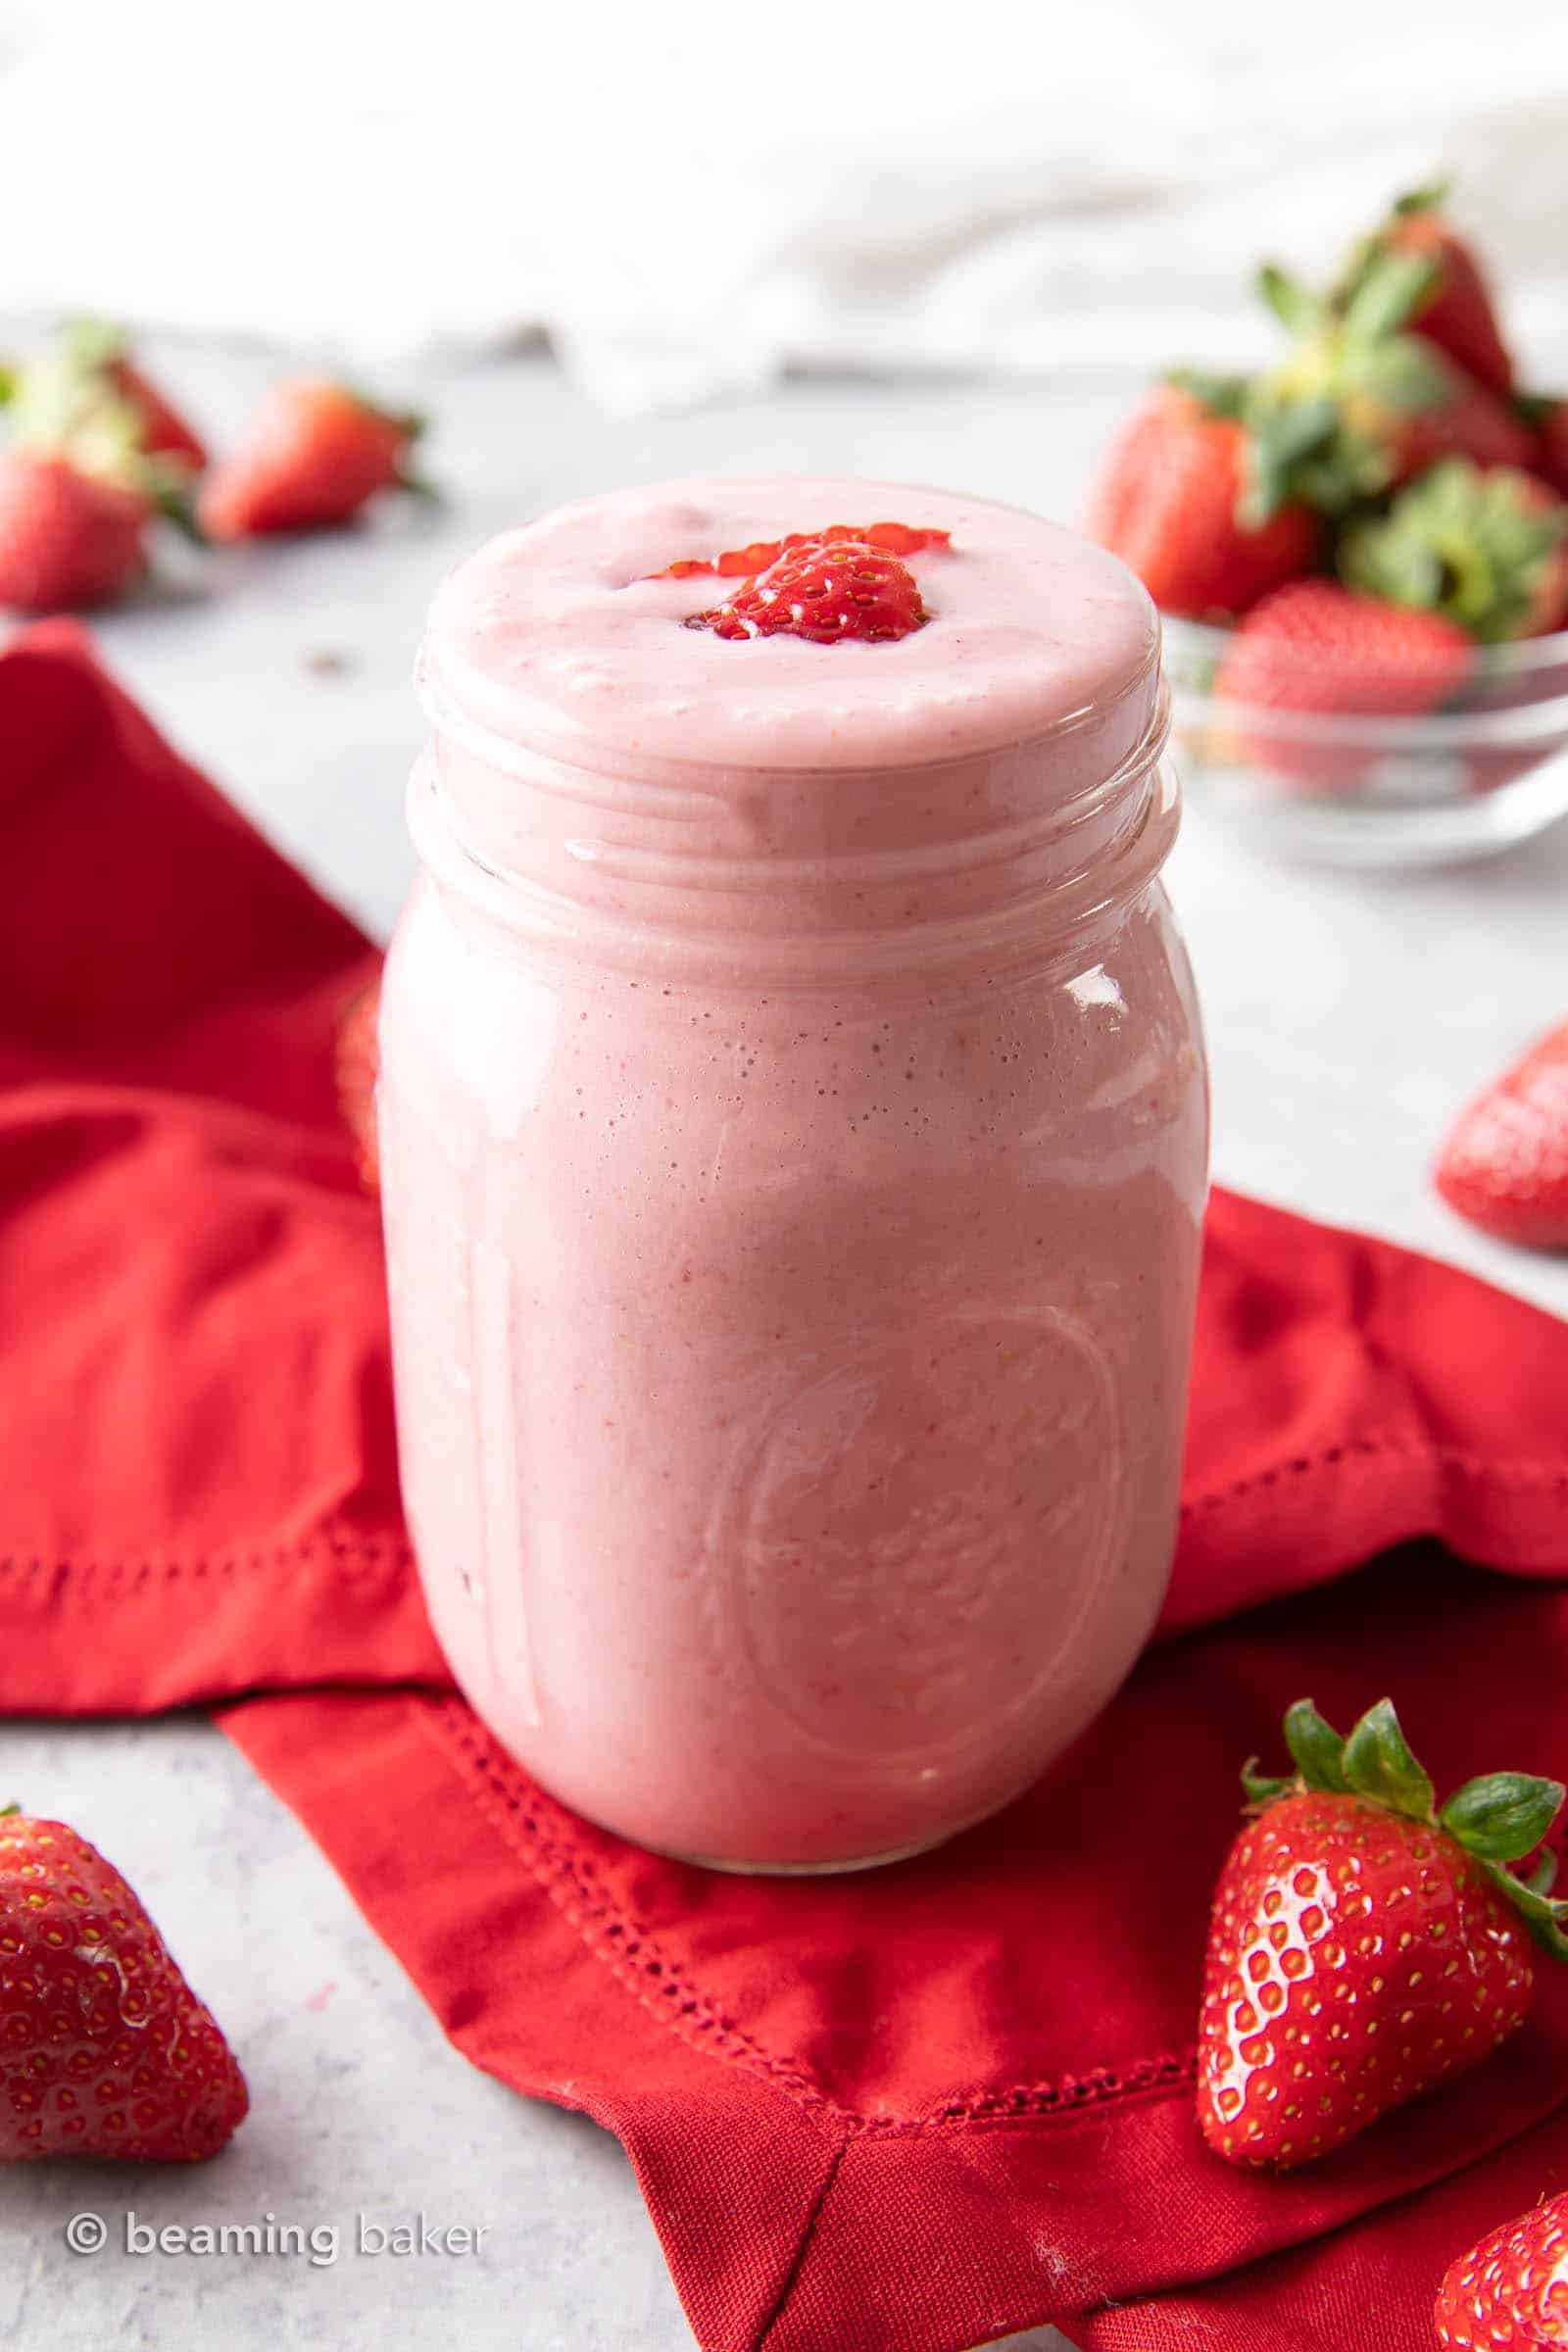 Strawberry Protein Shake Recipe: this easy vegan protein shake recipe is smooth, creamy & packed with strawberries! Healthy, High-Protein, Dairy-Free. #ProteinShake #PlantPowered #Strawberries #Healthy | Recipe at BeamingBaker.com